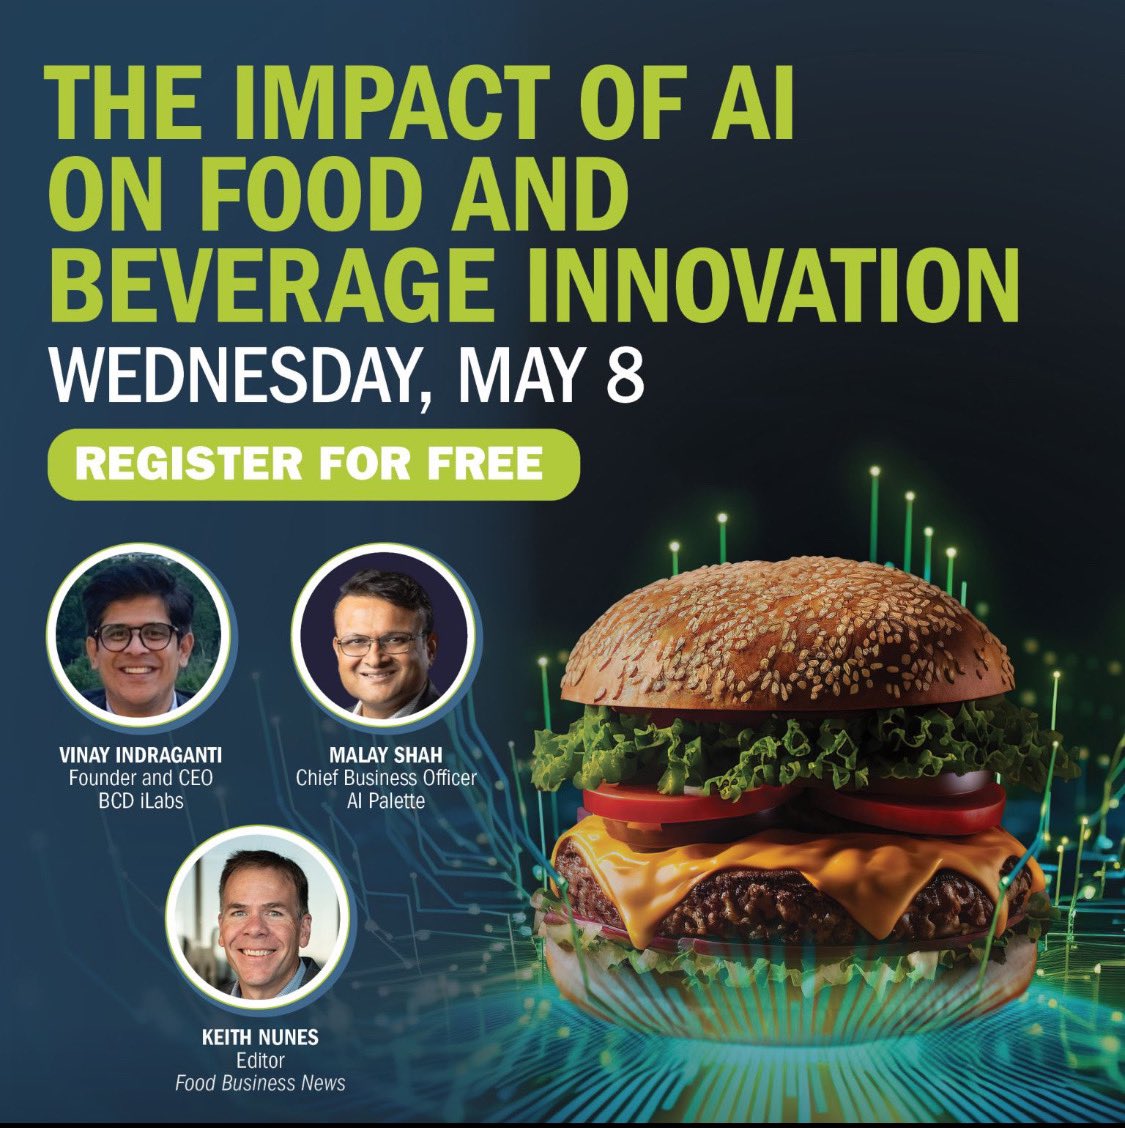 BCD is thrilled to announce our participation in the Trends and Innovations webinar, where our Founder and CEO, #VinayIndraganti, alongside #MalayShah, will discuss the transformative impact of AI in the food industry! #AIForFood Join us as we explore how AI is revolutionizing